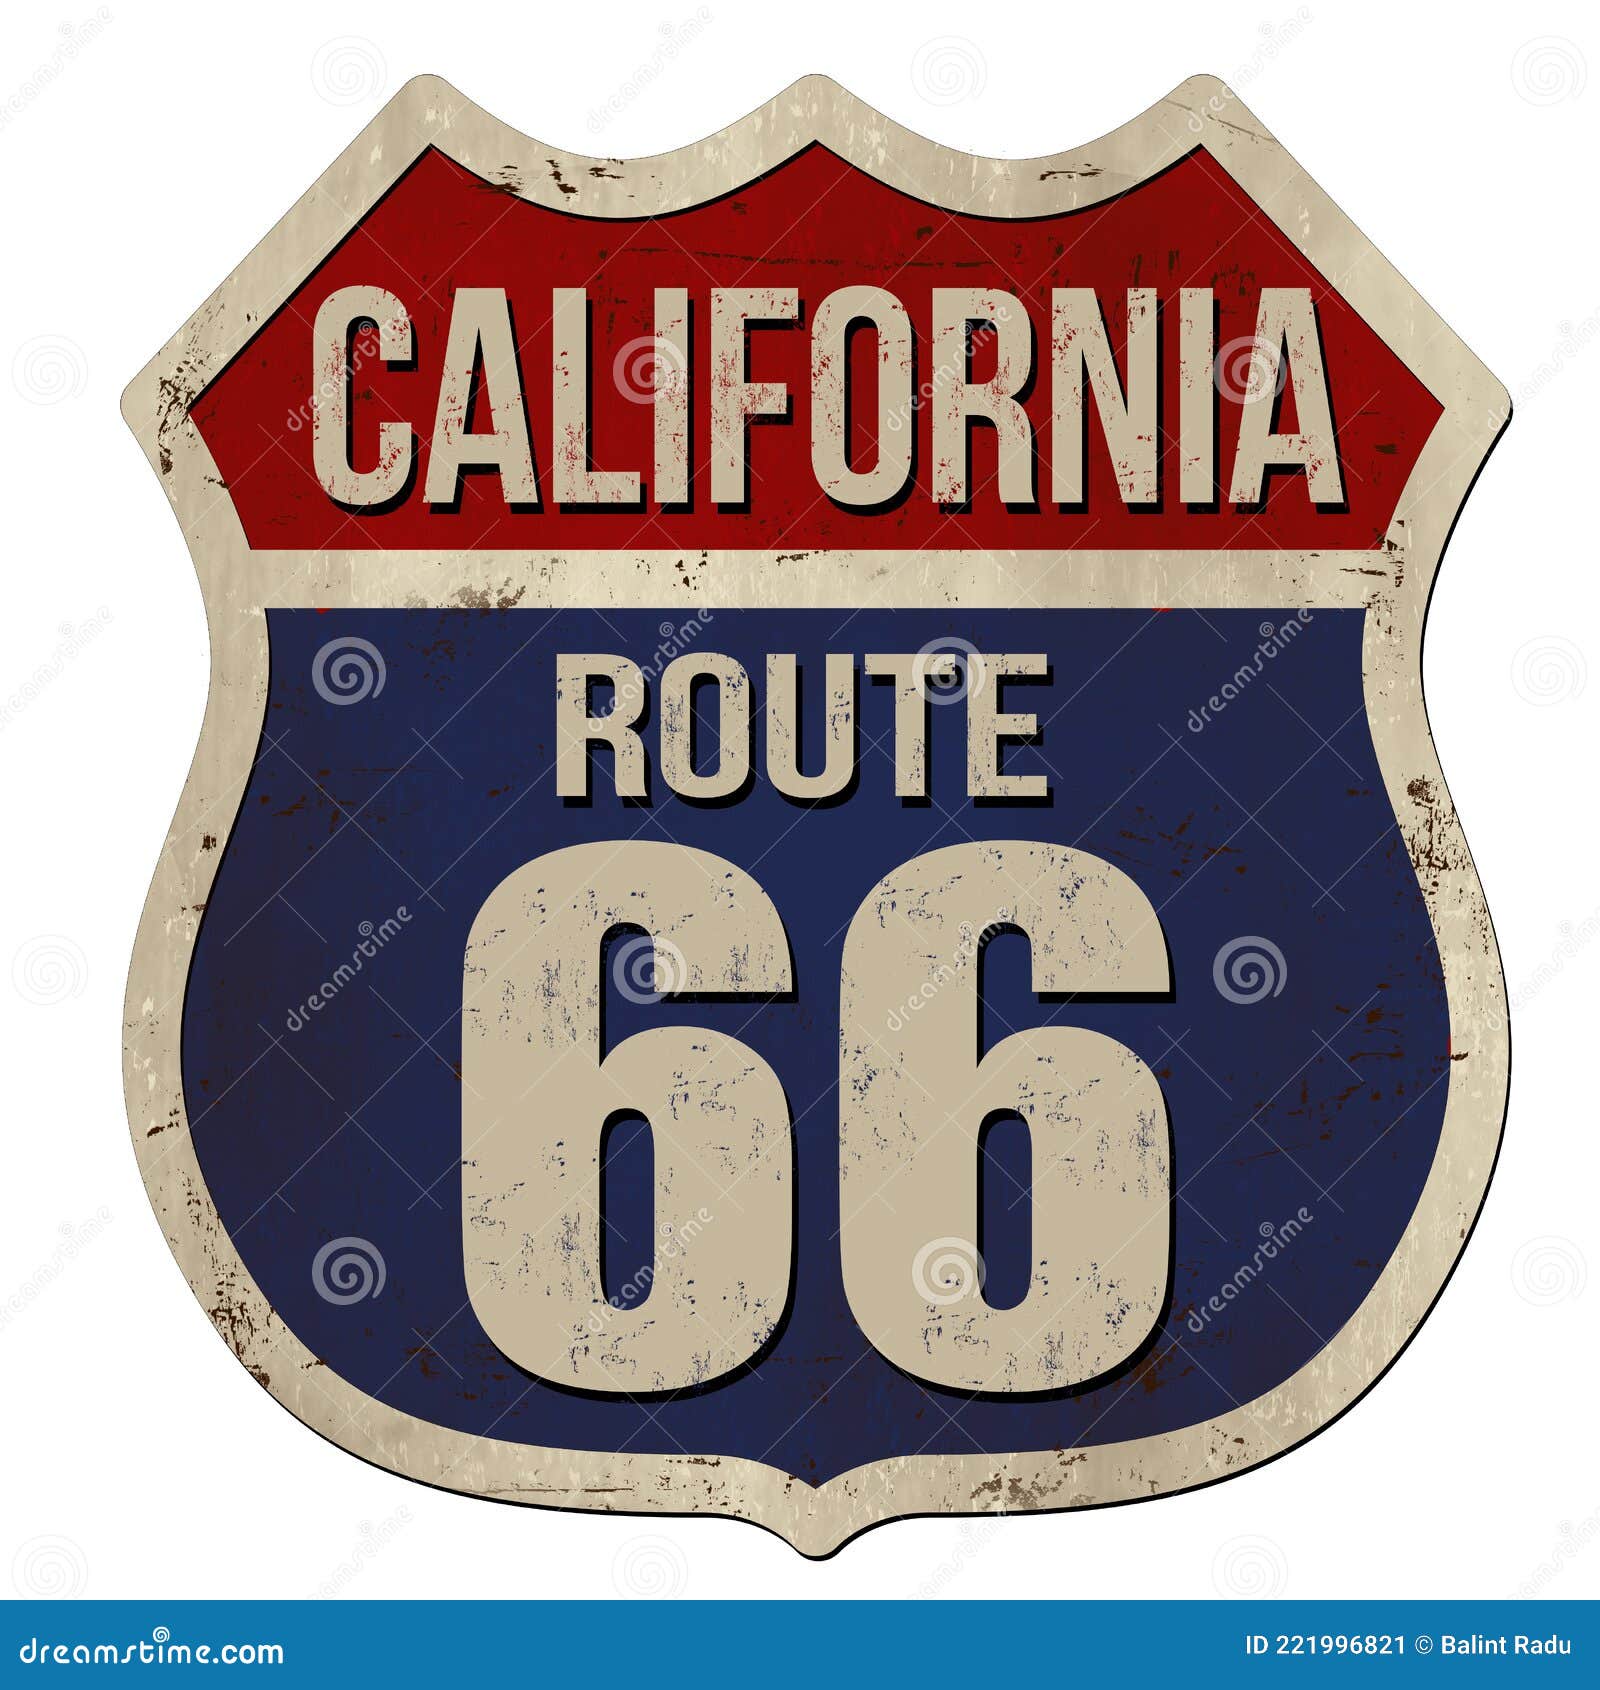 california, route 66 vintage rusty metal sign